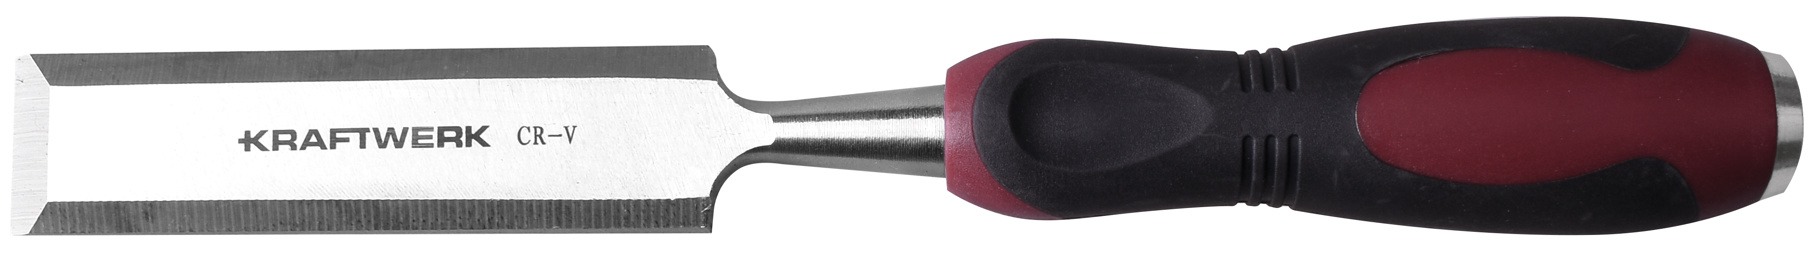 Wood chisel with strike cap, 38 mm